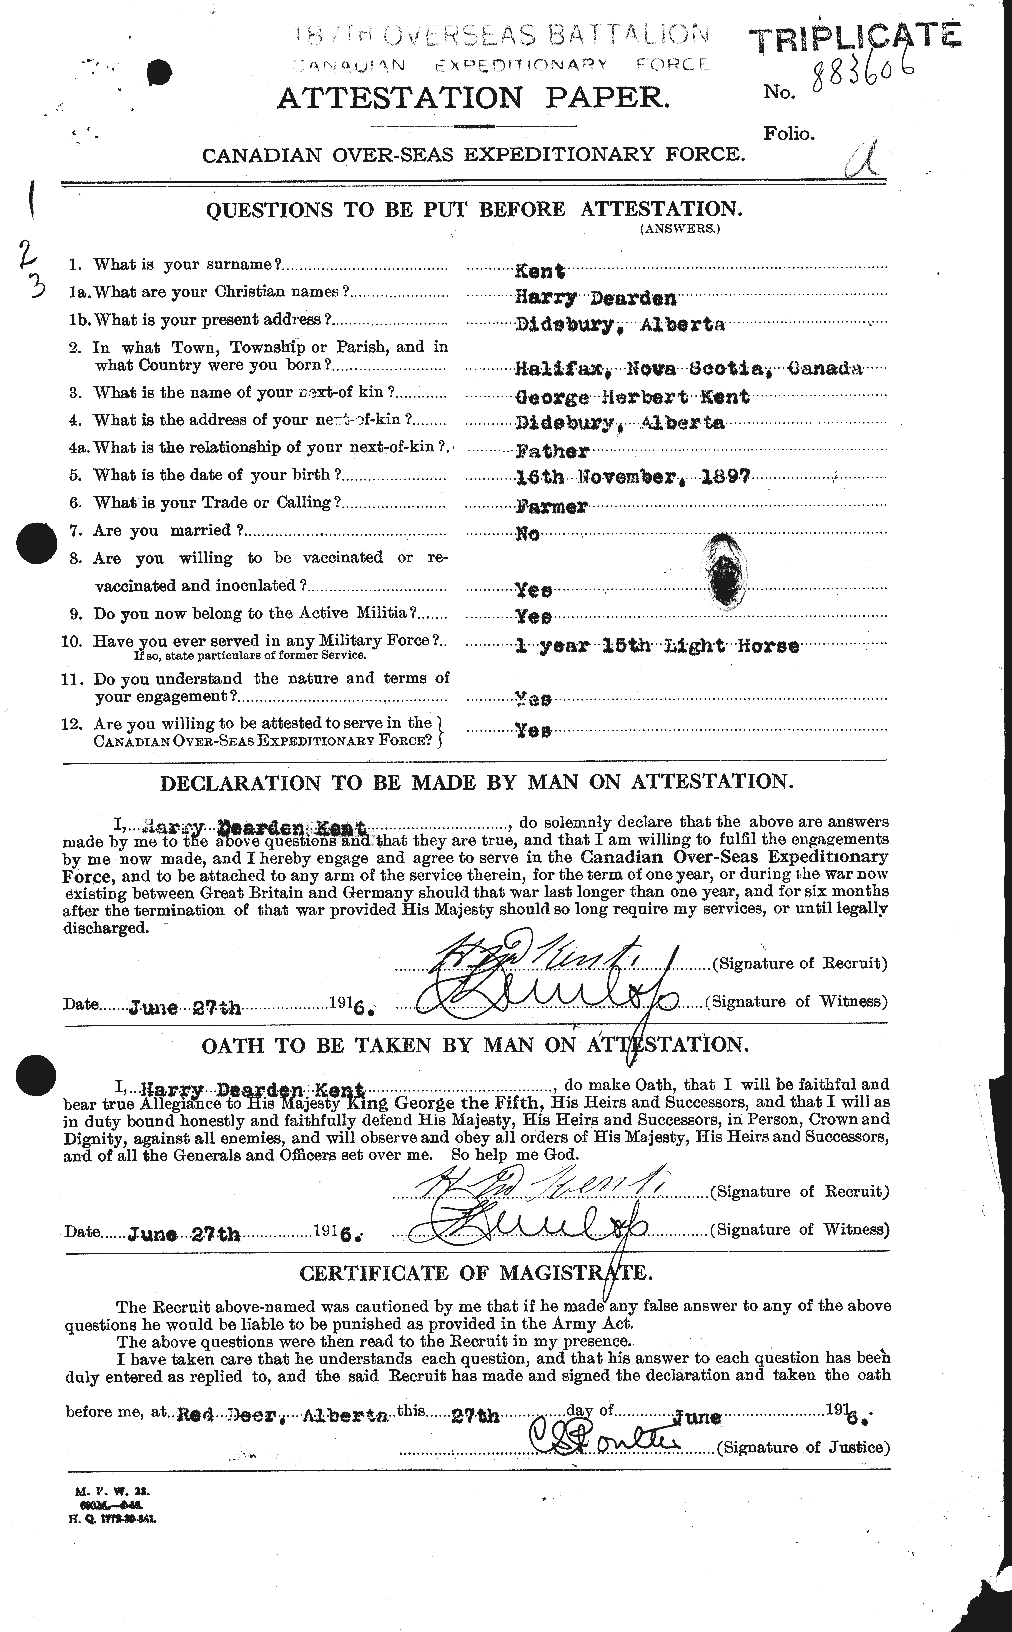 Personnel Records of the First World War - CEF 429497a